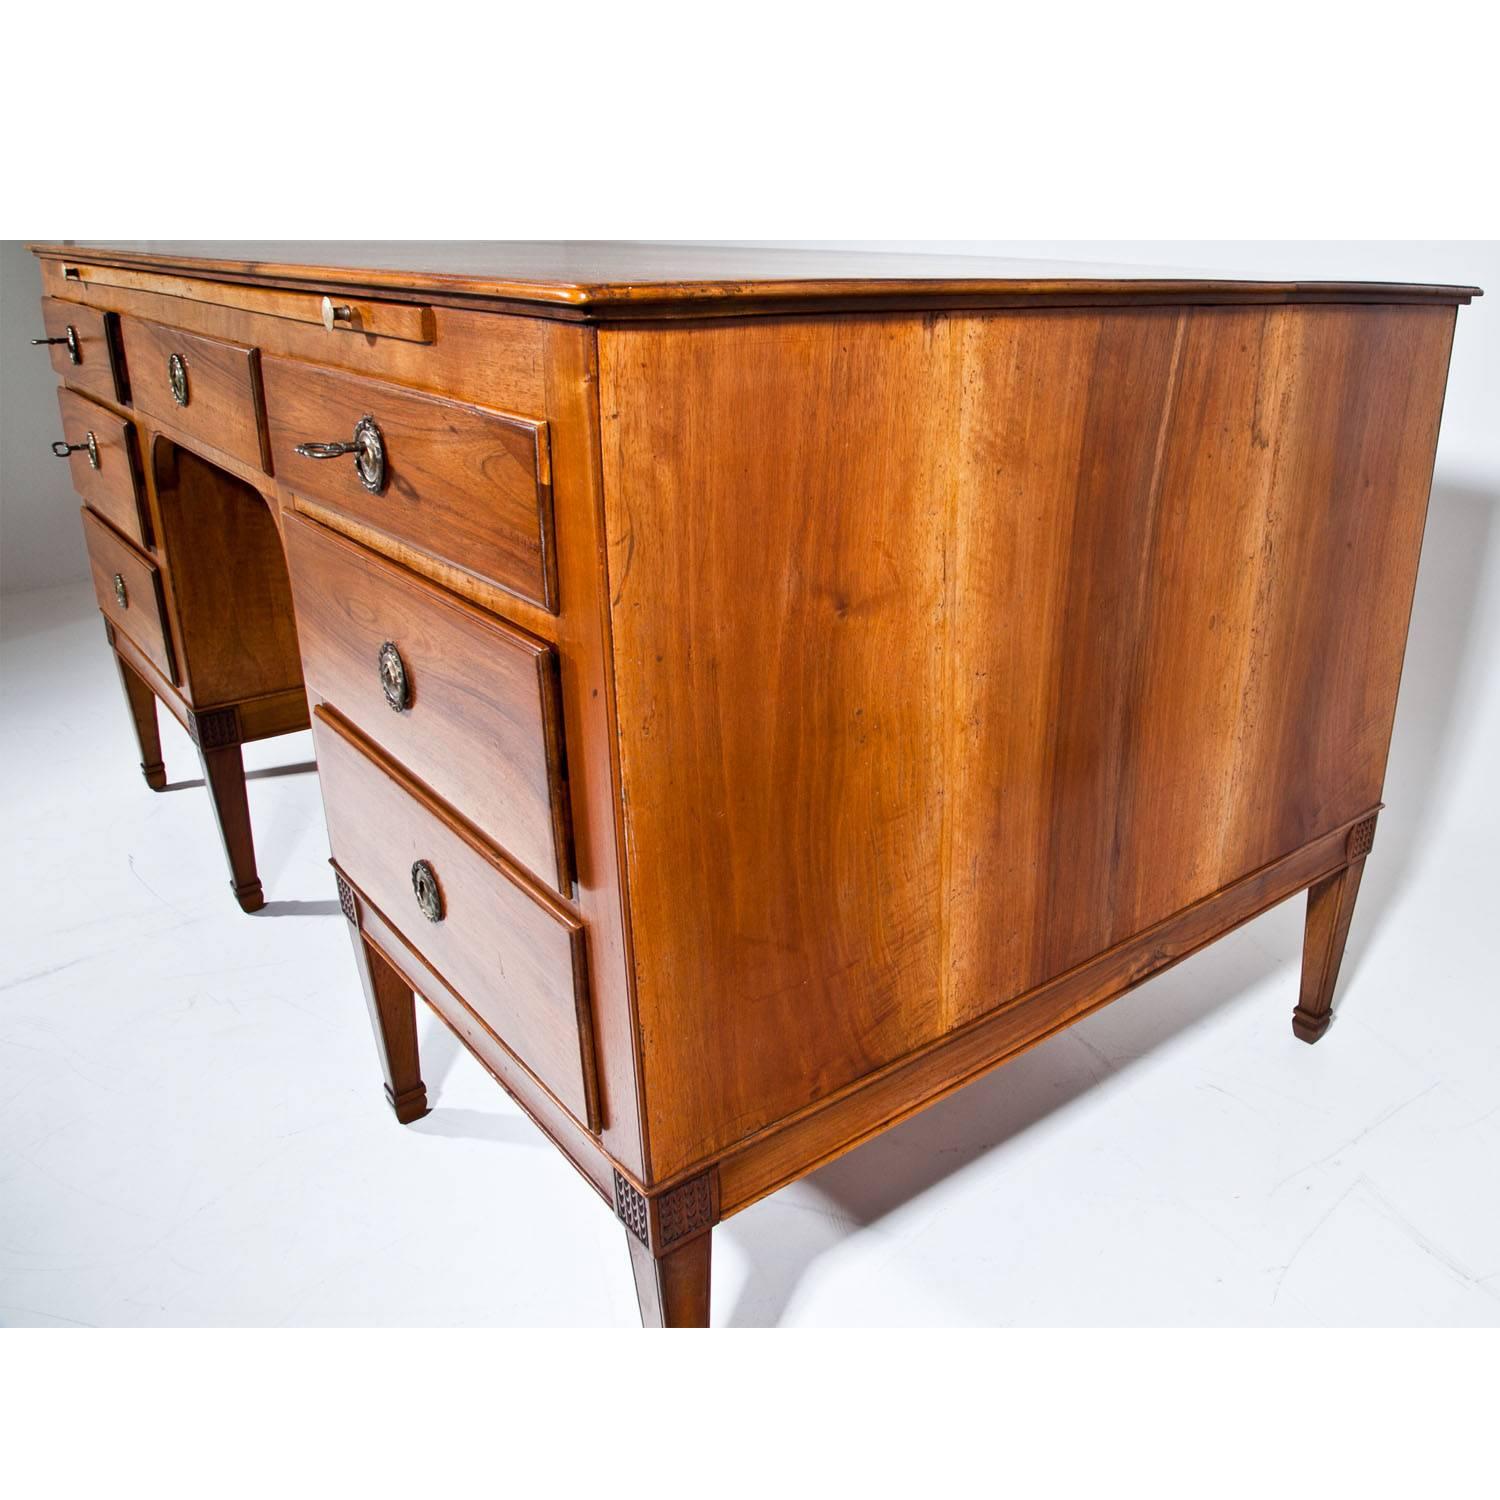 Large executive desk on eight tapered feet with small bases and a carved scale pattern. The desk has seven drawers and the back is designed in correspondence to the front, where fillings with brass fittings simulate drawers. A retractable writing